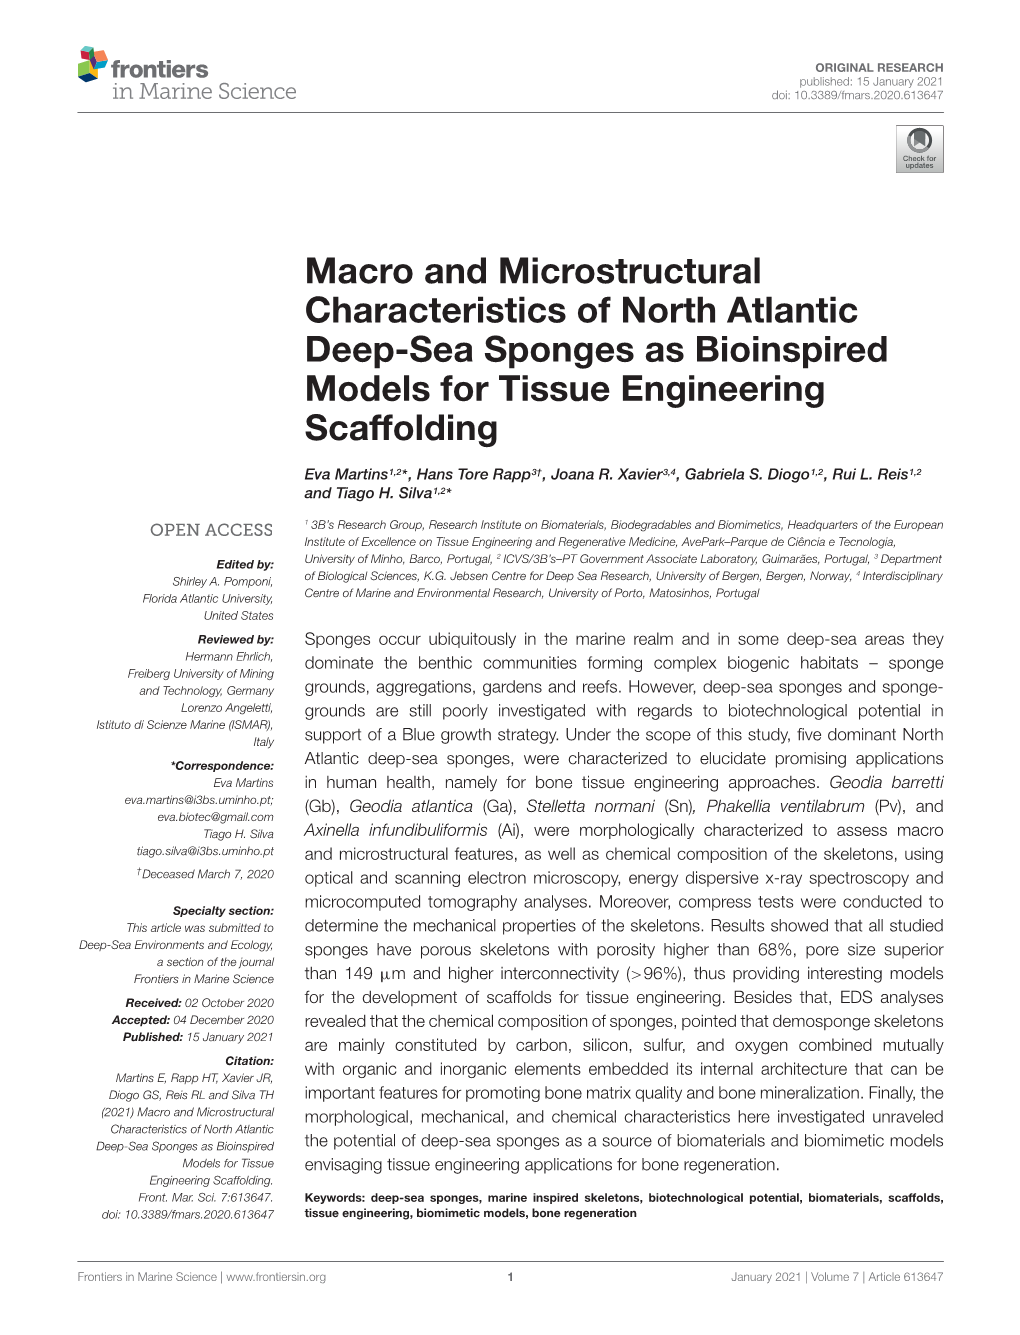 Macro and Microstructural Characteristics of North Atlantic Deep-Sea Sponges As Bioinspired Models for Tissue Engineering Scaffolding